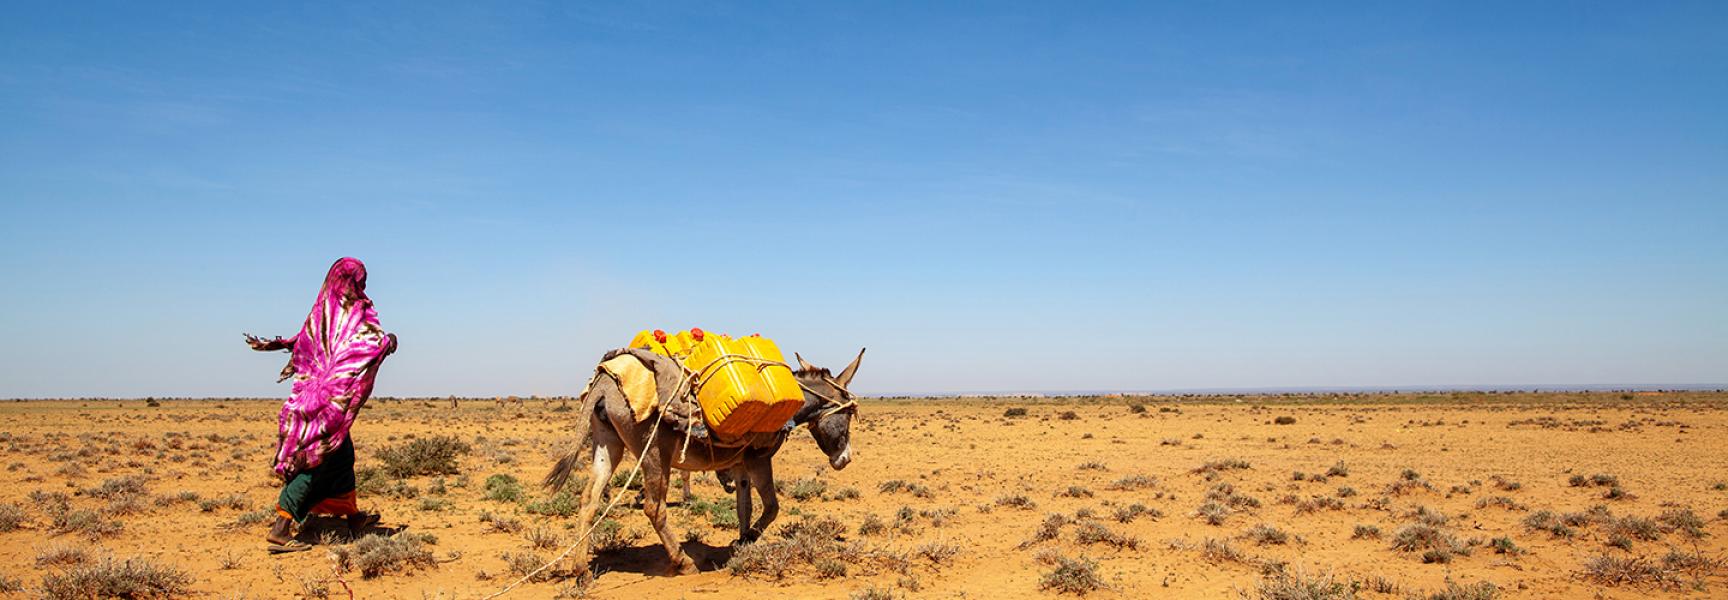 Woman walking with donkey in the desert